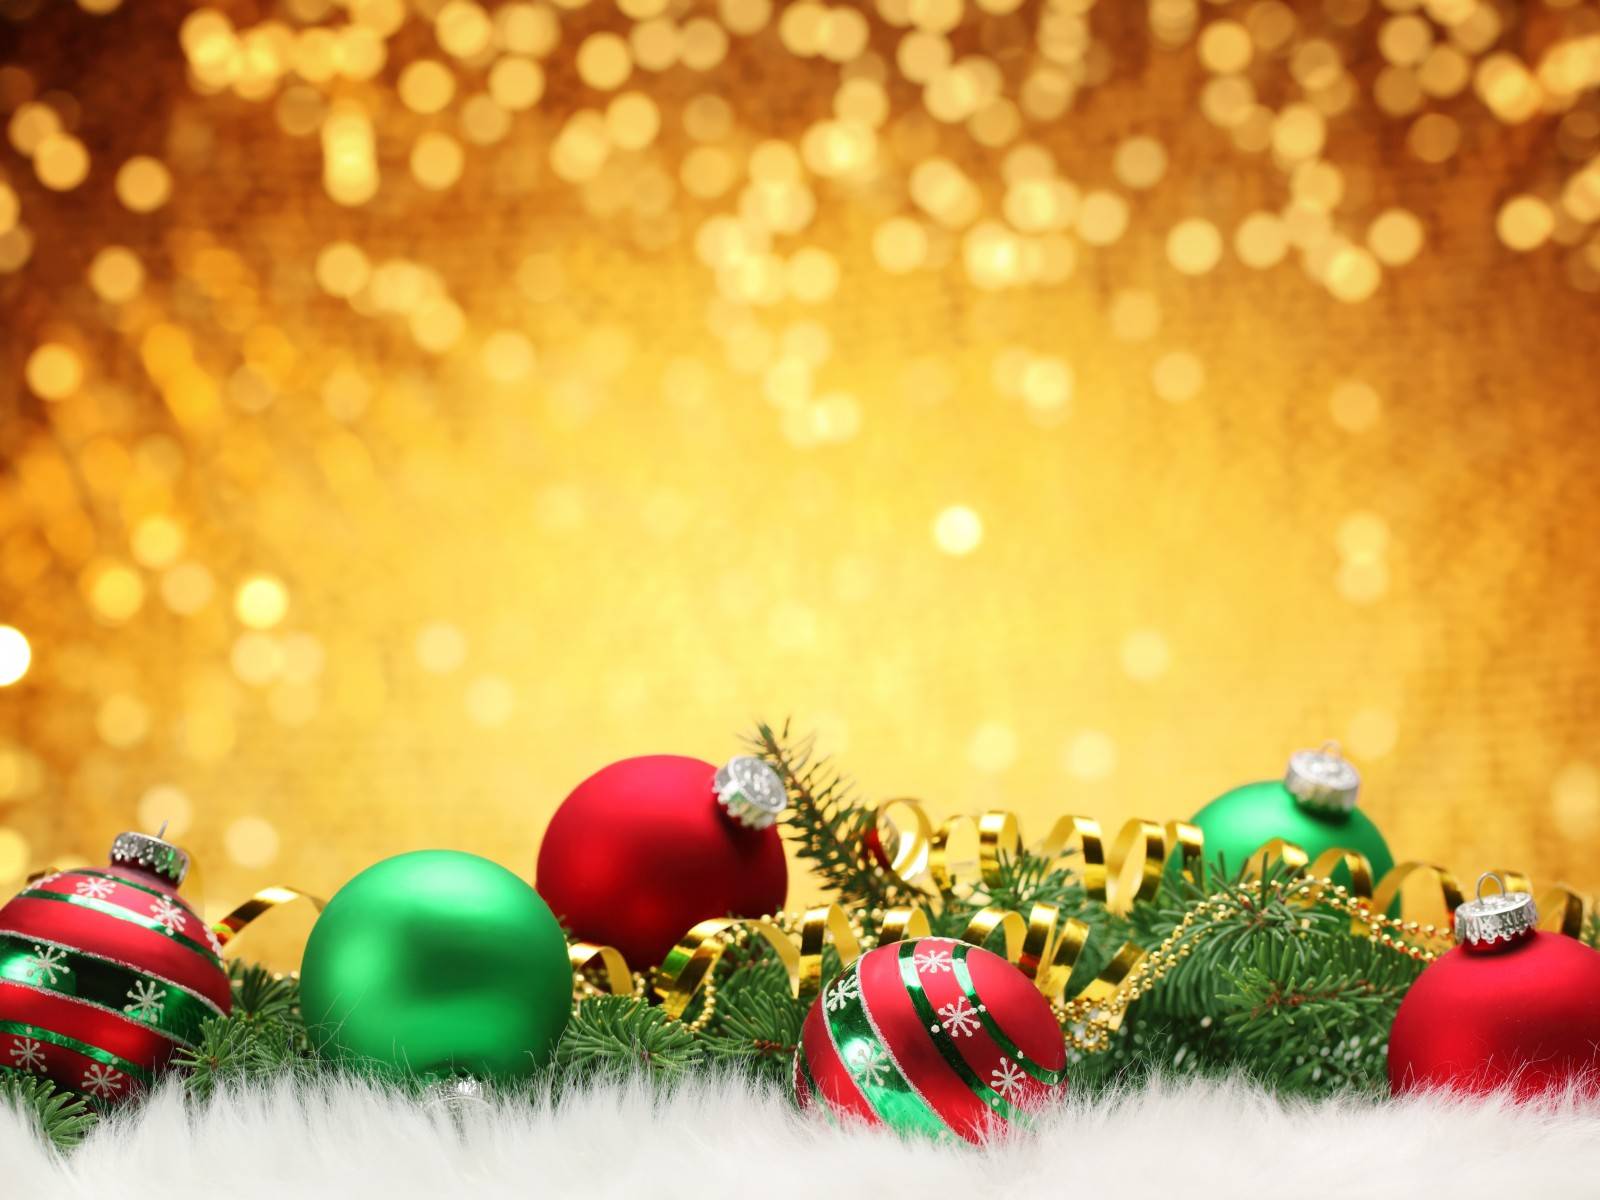 Christmas Background Wallpaper Download Of Best Christmas Backgrounds